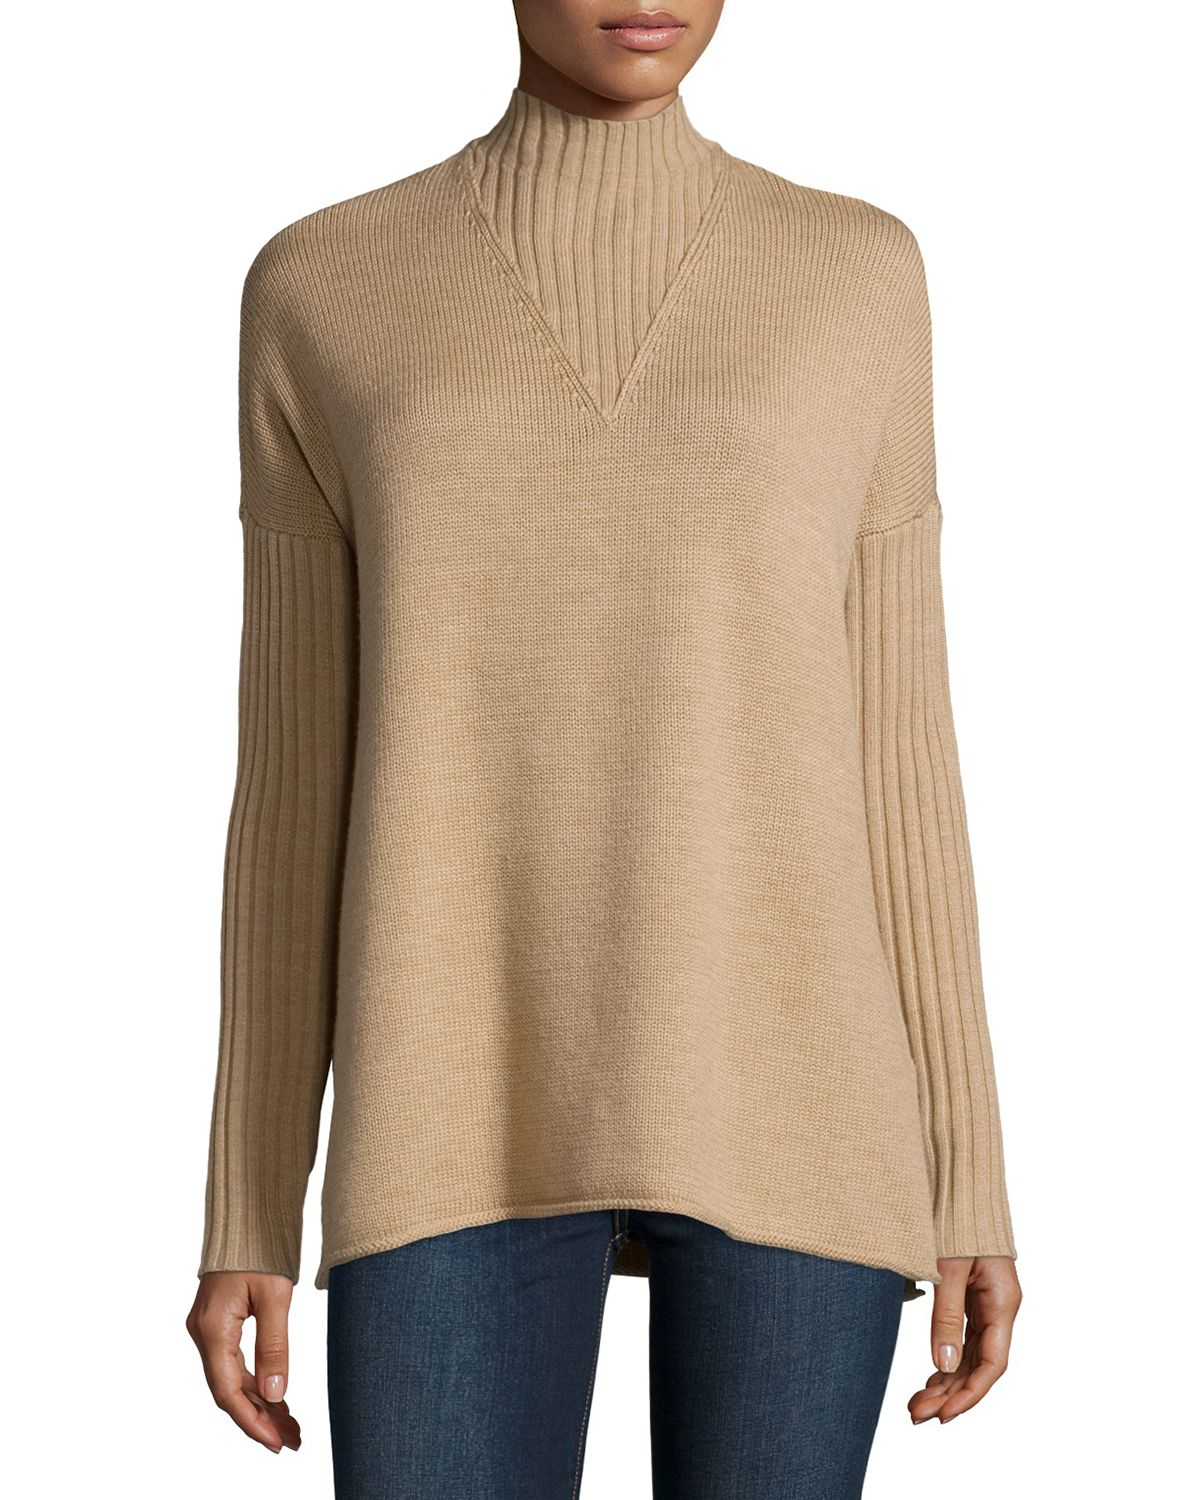 Lyst - Tory Burch Mock-neck Long-sleeve Oversize Sweater in Natural